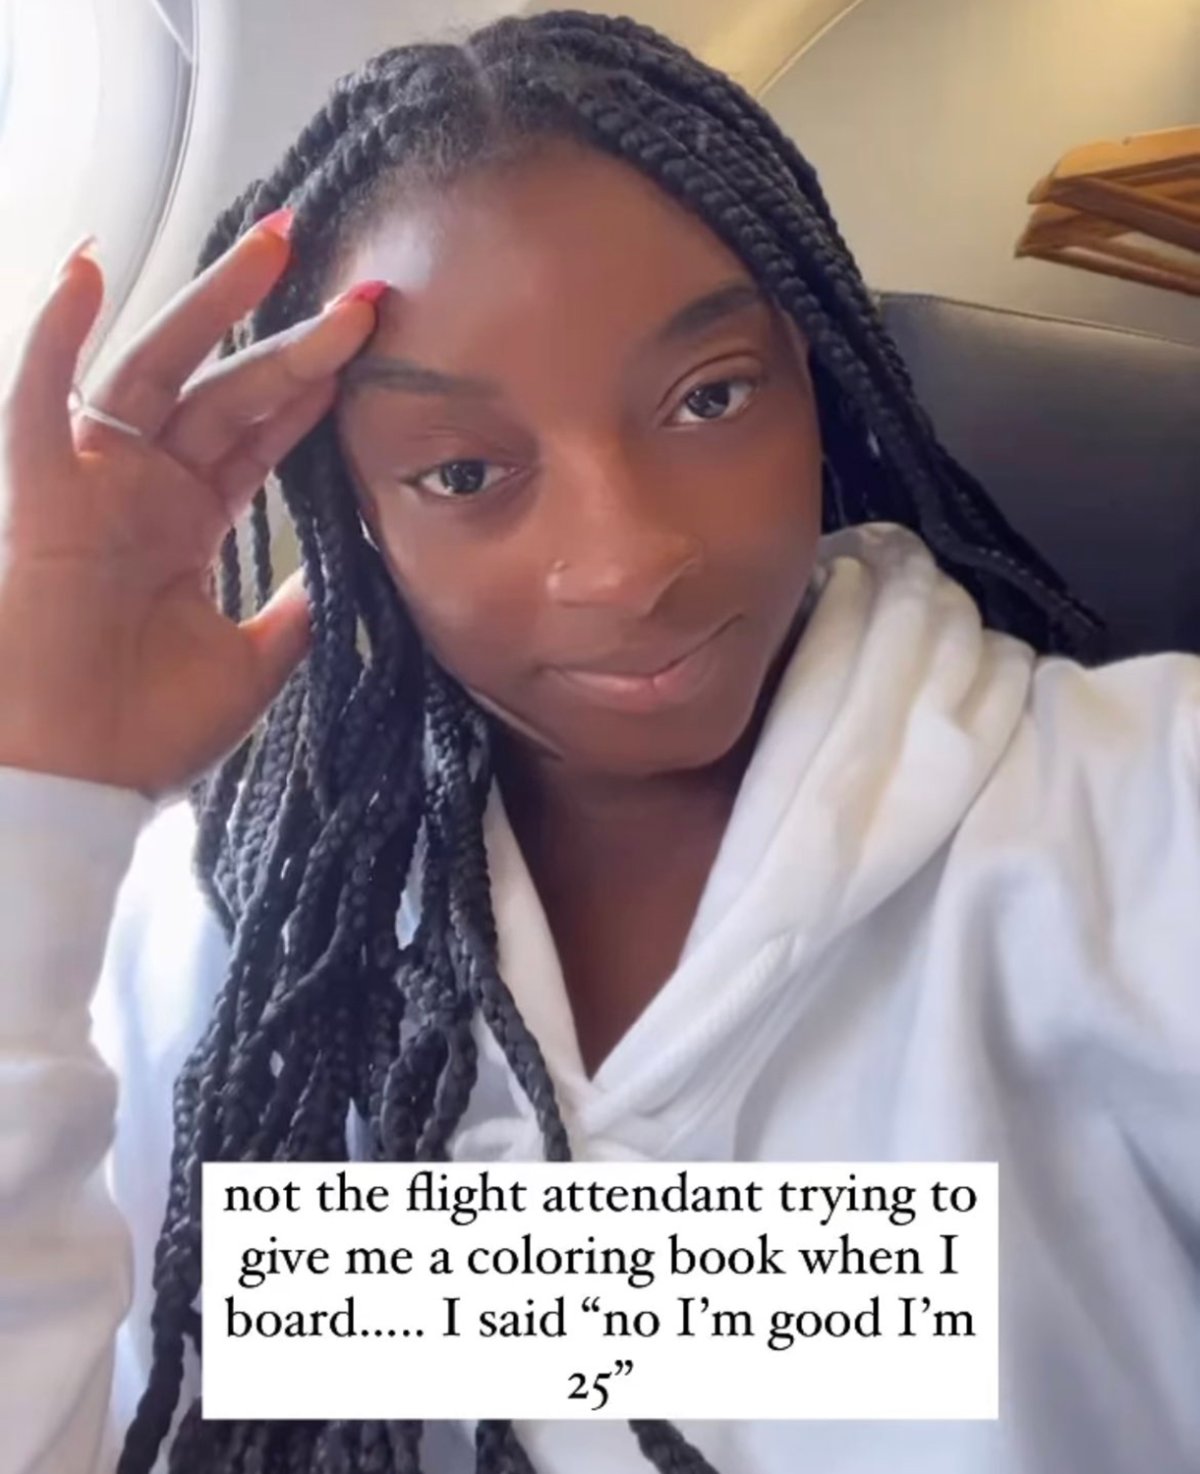 Simone Biles with a look of disbelief on her face after a flight attendant offered her a colouring book on a recent flight.